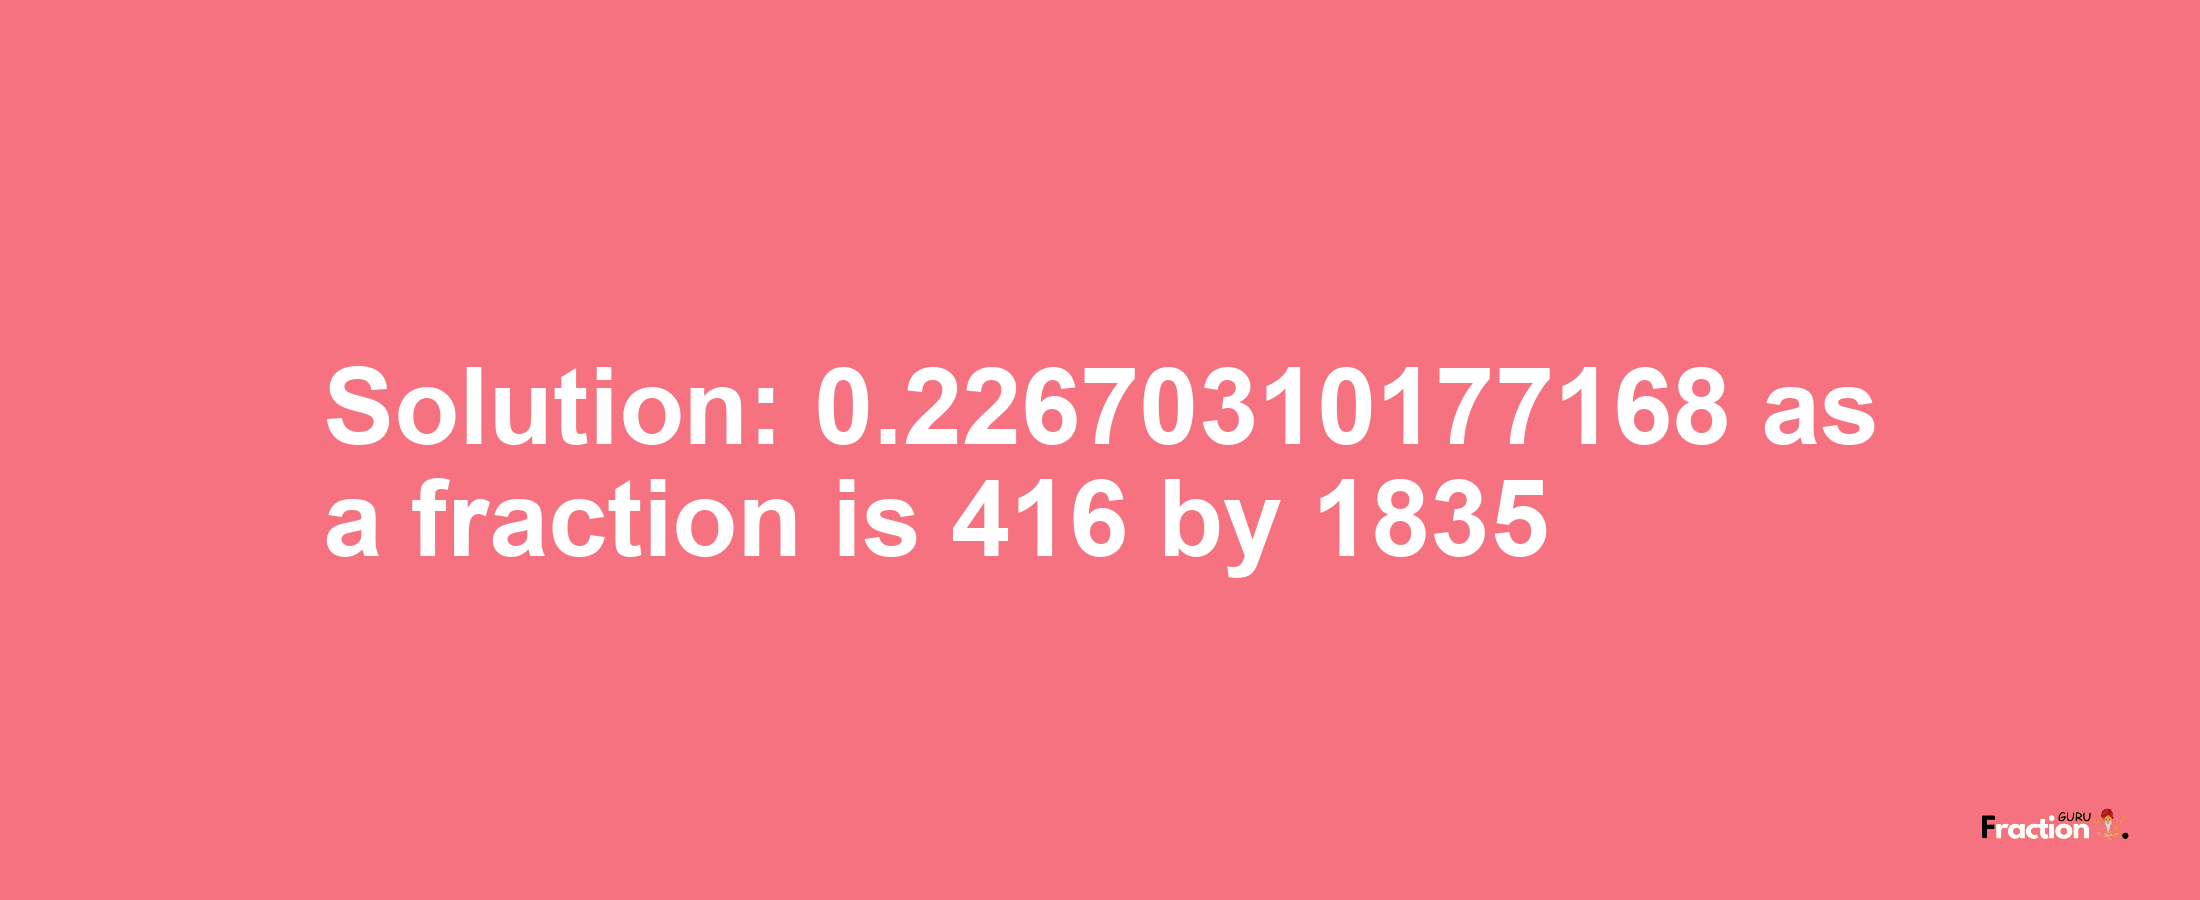 Solution:0.22670310177168 as a fraction is 416/1835